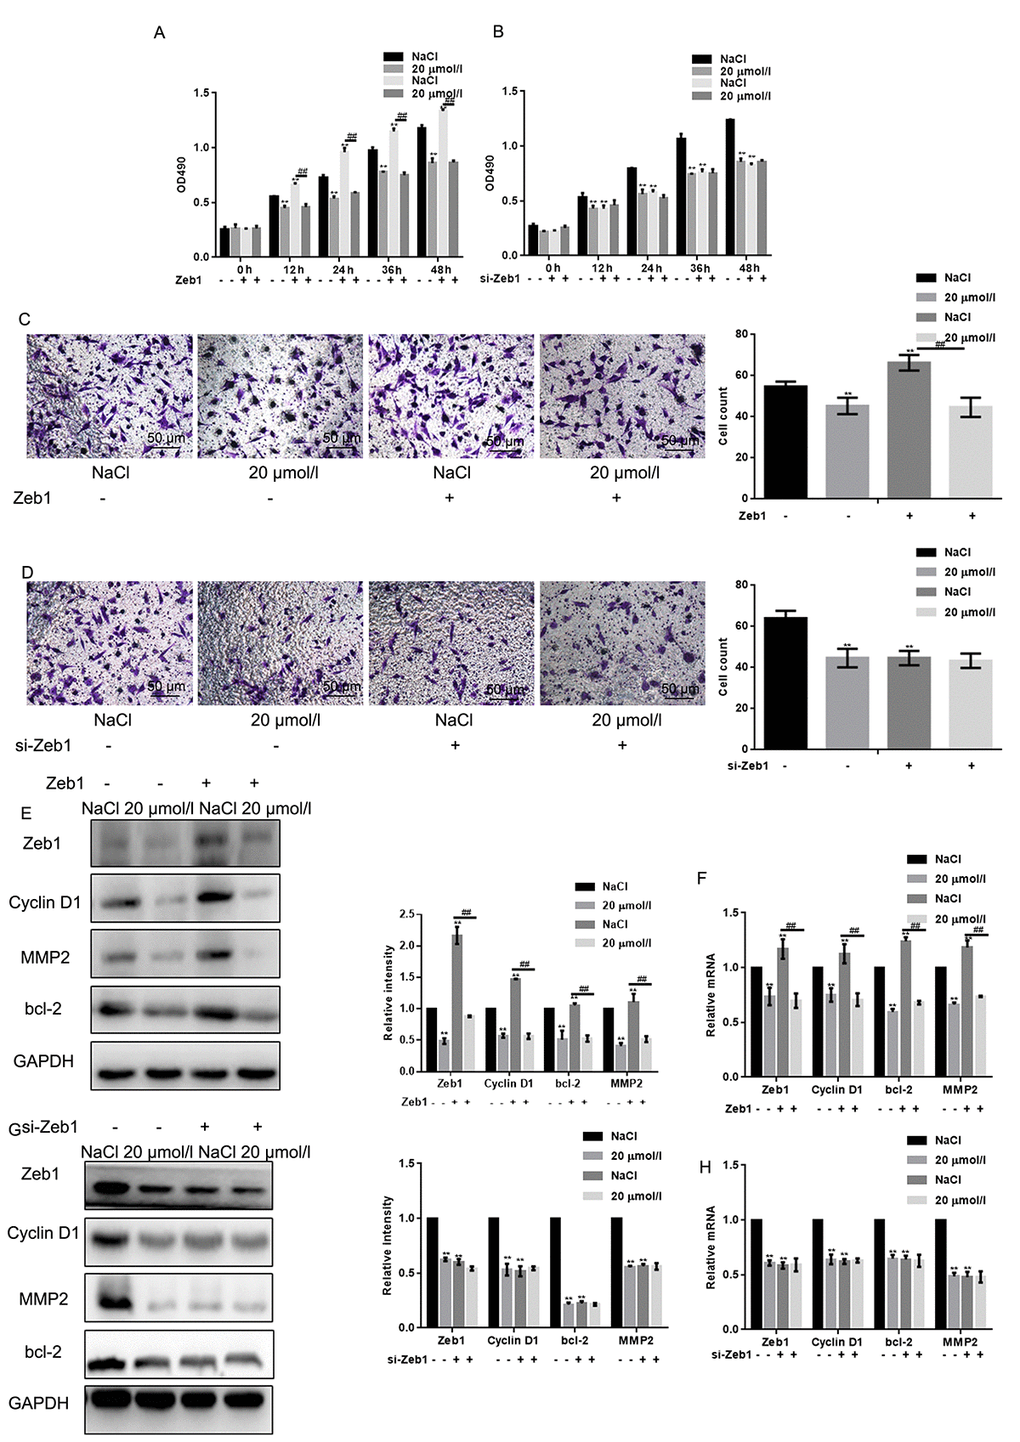 Naringin suppresses osteosarcoma cell proliferation and migration by inhibiting Zeb1. (A) MTT proliferation assay of MG63 cells expressing a control vector or Zeb1. Cells were incubated with 20 μmol/L of naringin or NaCl and assayed at the indicated times. Results represent the mean ± SD of three experiments done in triplicate. **P P B) MTT proliferation assay of MG63 cells transfected with si-Zeb1 (Zeb1 silencing) or si-NC (negative control). Cells were treated with 20 μmol/L of naringin or NaCl and assayed at the indicated times. Results represent the mean ± SD of three experiments done in triplicate. **P C) Results of Transwell migration assays (without Matrigel) performed in MG63 cells expressing control vectors or Zeb1. Cells were treated with 20 μmol/l of naringin or NaCl. **P P D) Results of Transwell migration assays (without Matrigel) performed in MG63 cells transfected with si-Zeb1 (Zeb1 silencing) or si-NC (negative control). Cells were treated with 20 μmol/l of naringin or NaCl. **P E, F) Western blot and real-time PCR assay results for Zeb1, Cyclin D1, bcl-2, and MMP2 expression in MG63 cells expressing Zeb1 or empty vector. Cells were incubated with 20 μmol/l of naringin or NaCl (control). **P P G, H) Western blot and real-time PCR assay results for Zeb1, Cyclin D1, bcl-2, and MMP2 expression in MG63 cells transfected with si-Zeb1 or si-NC. Cells were treated with 20 μmol/l of naringin or NaCl. **P 